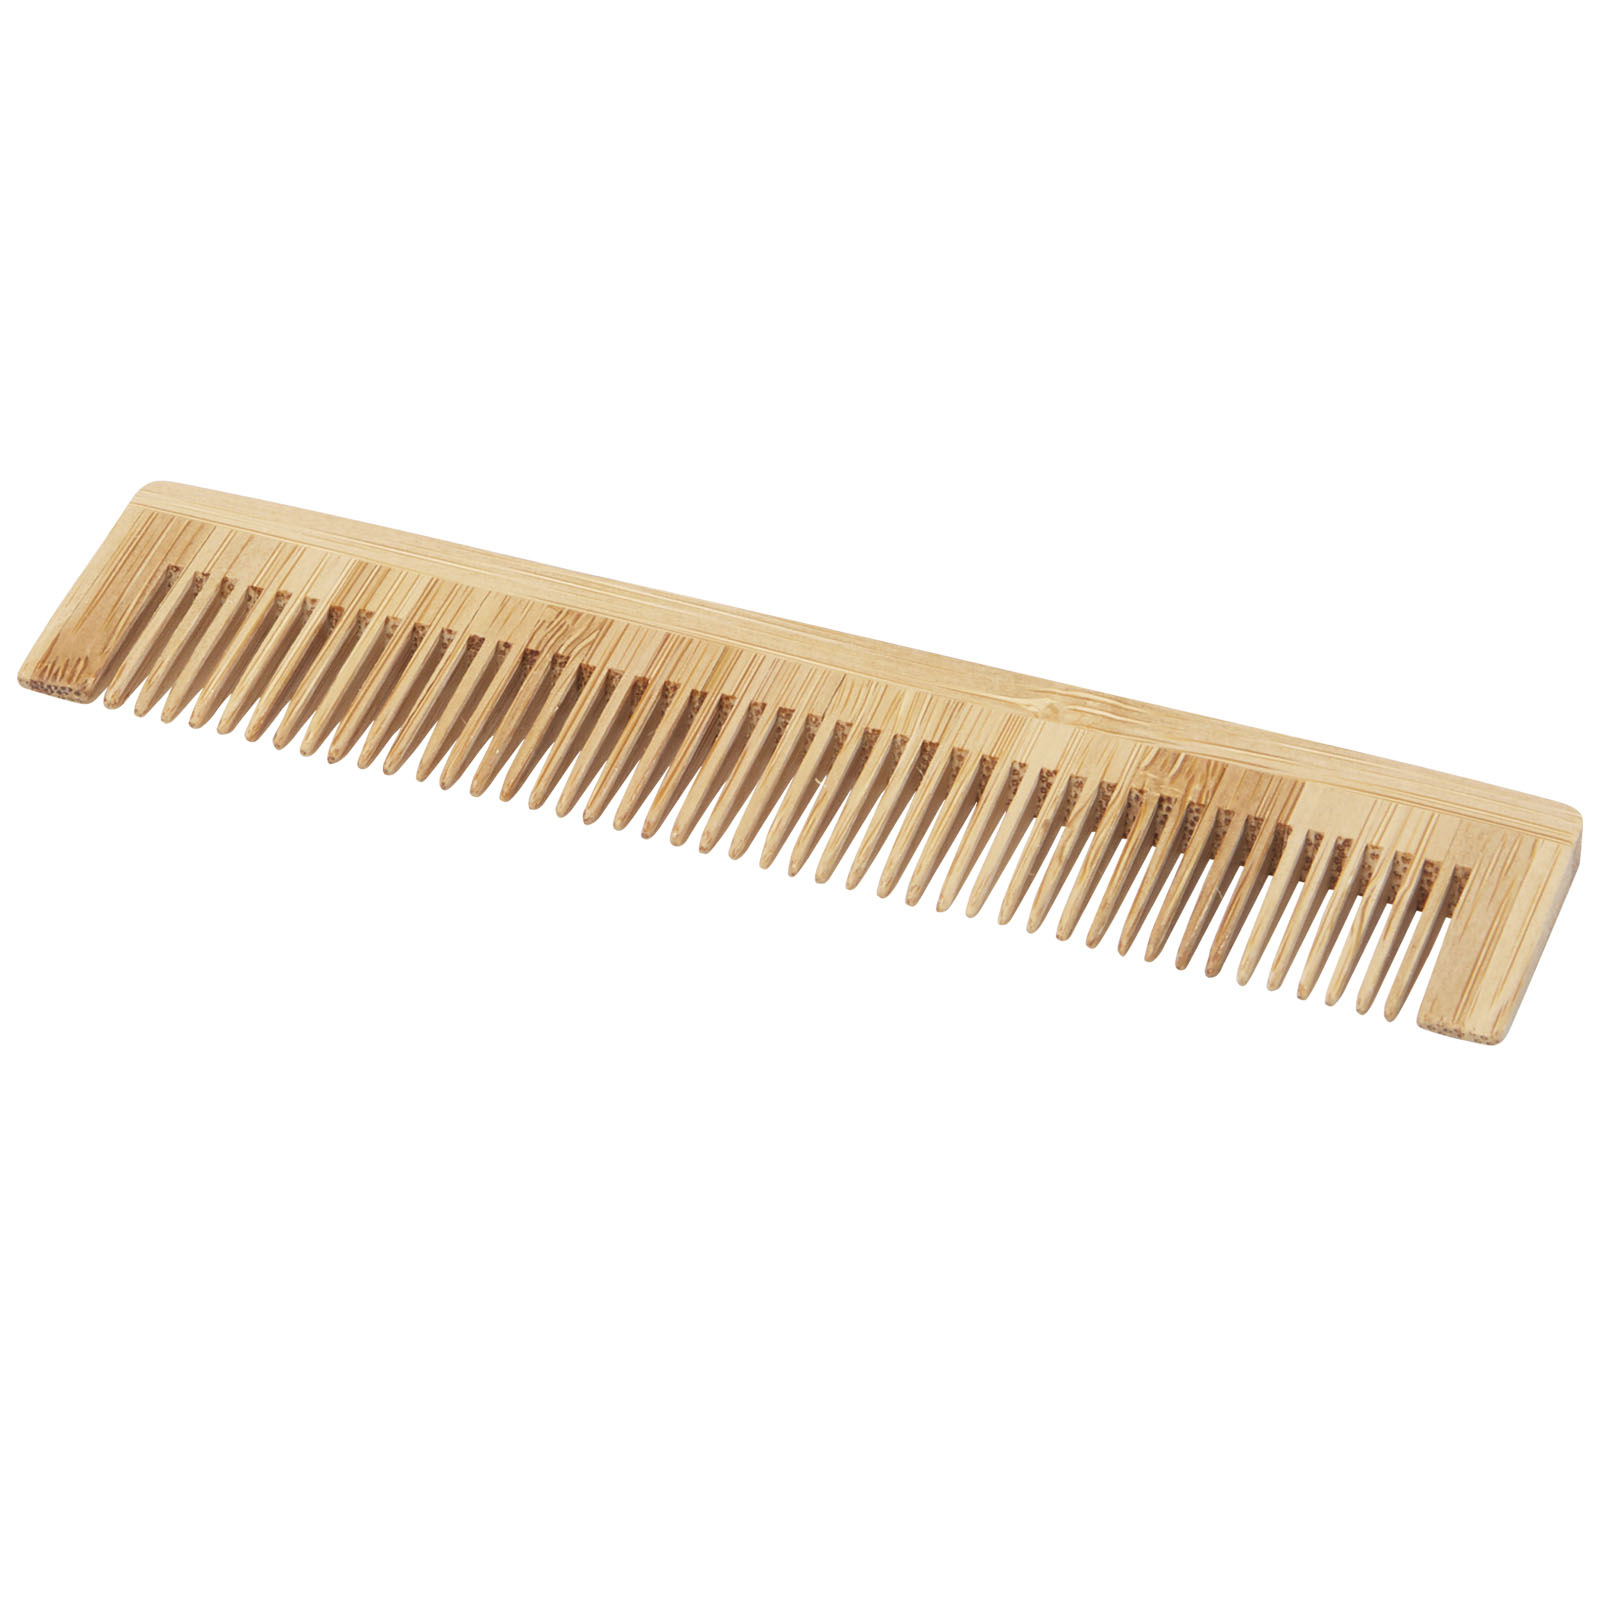 Personal Care - Hesty bamboo comb